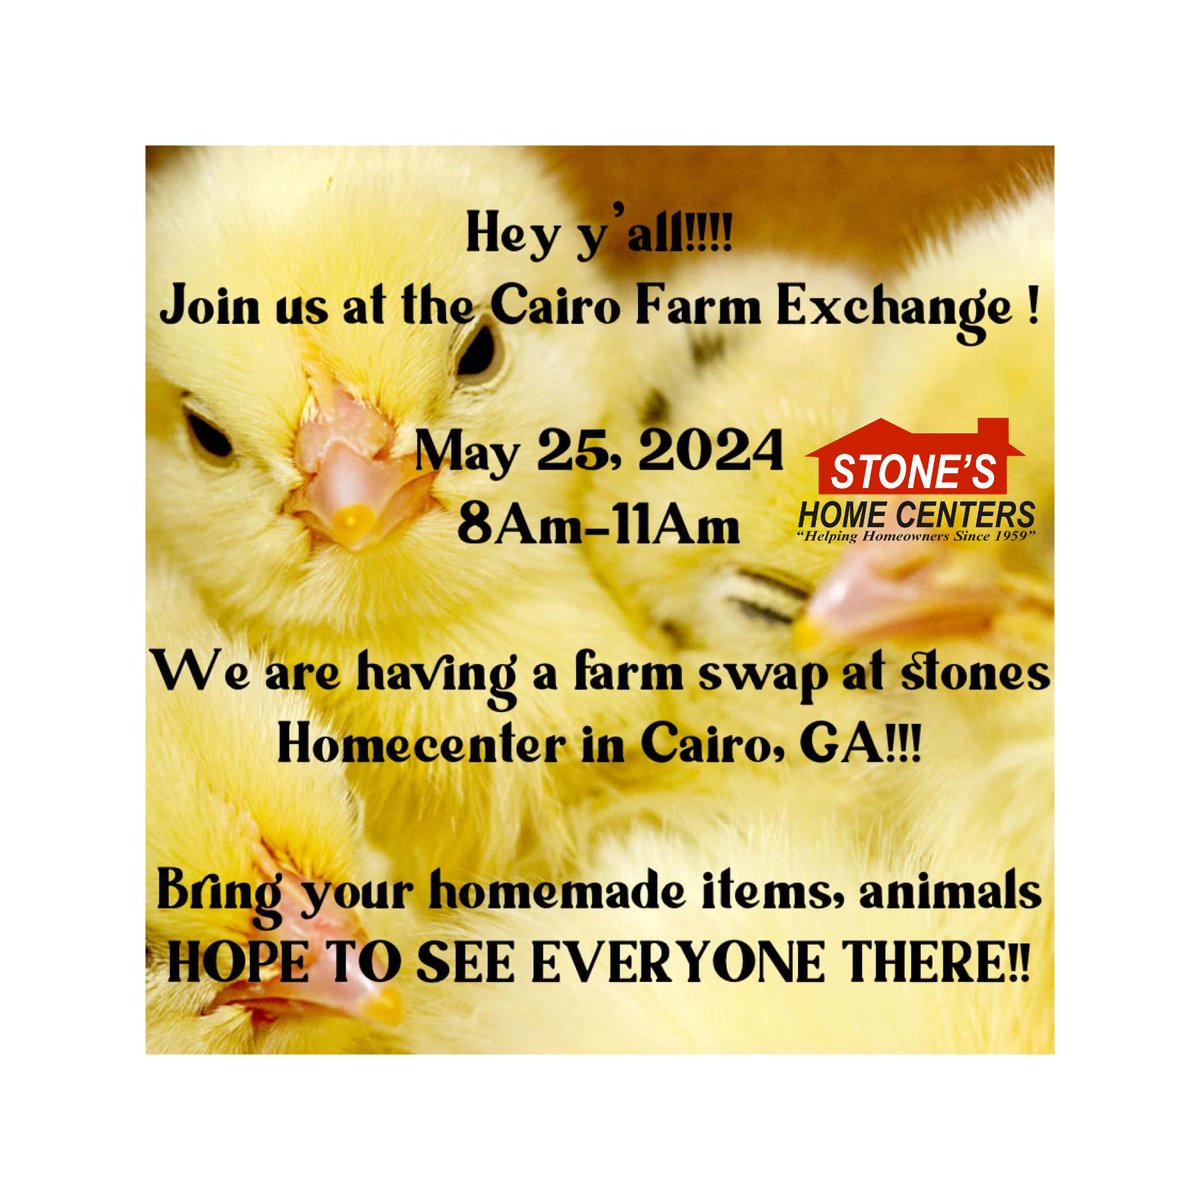 Join us tomorrow in the Stone's Home Centers parking lot between 8AM-11AM in Cairo, Georgia!
#farmexchange #farmswap #stoneshomecenters #cairoga